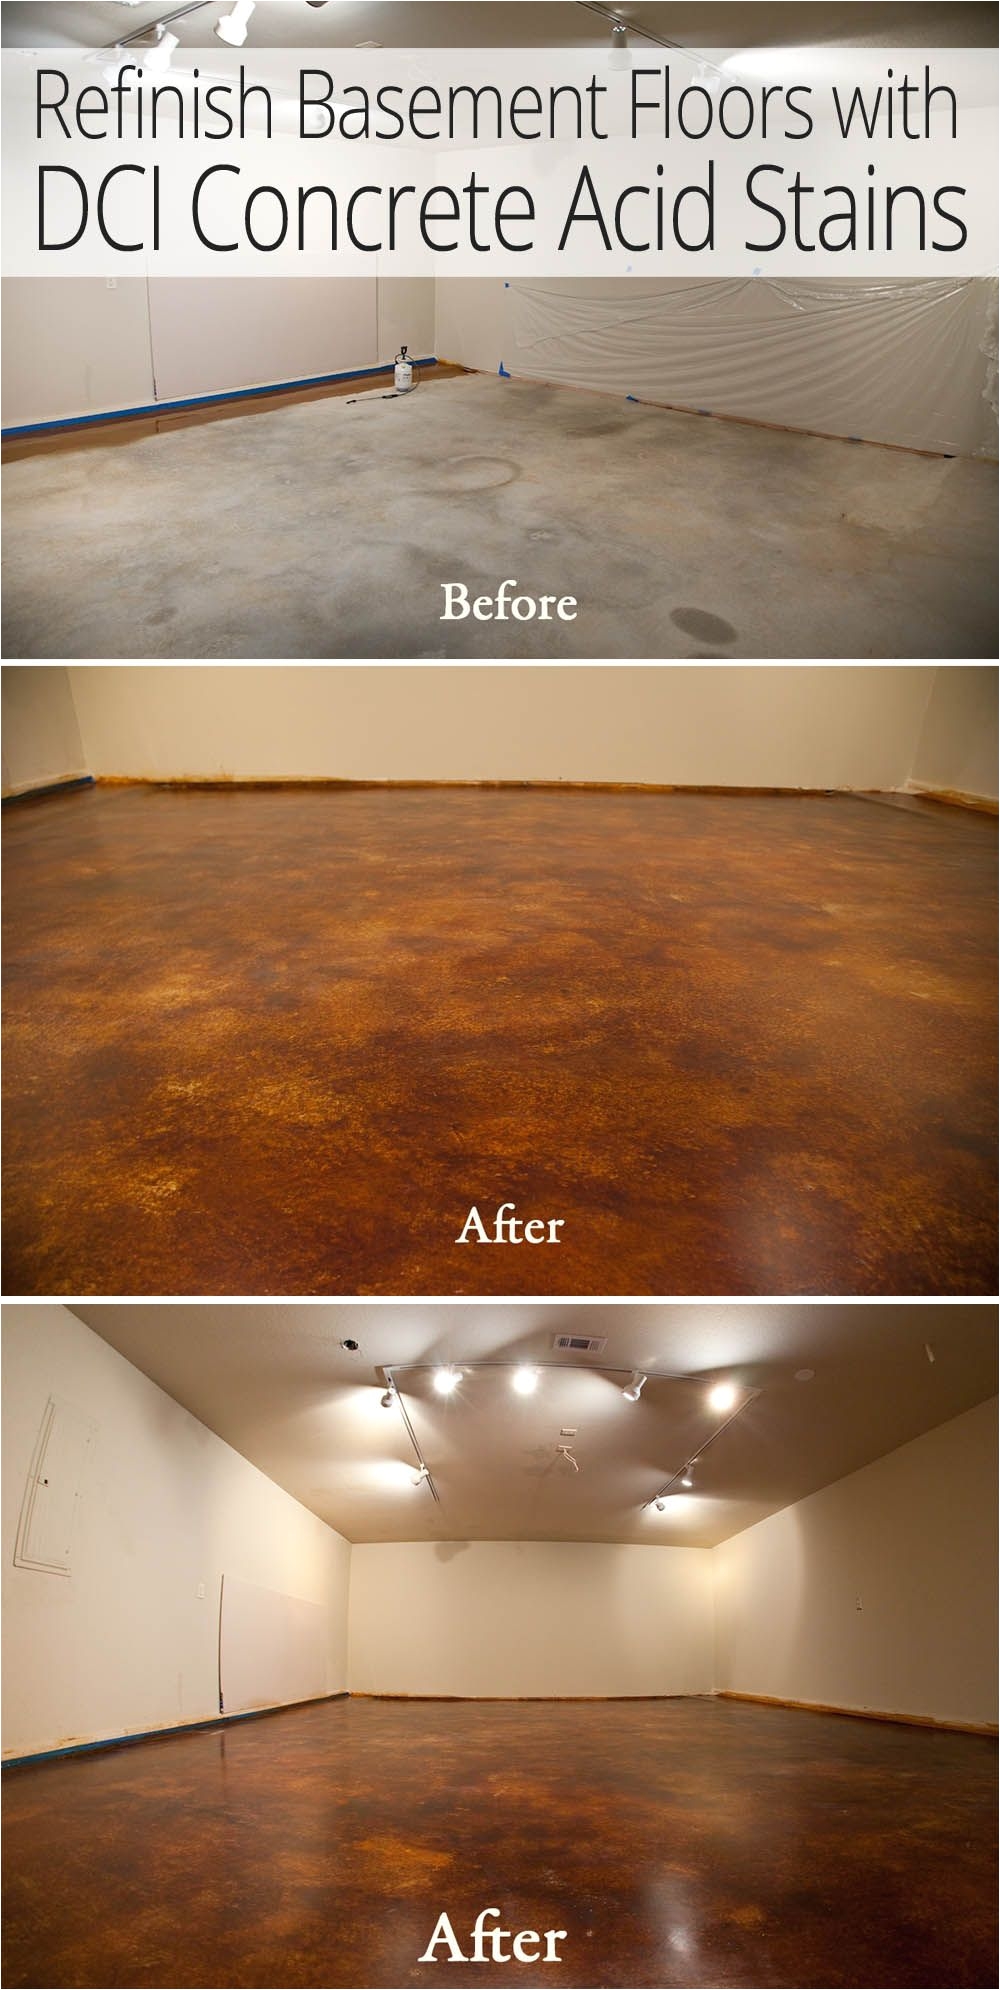 remodel basement floors for less with dci acid stain and concrete sealer hassle free option to carpet